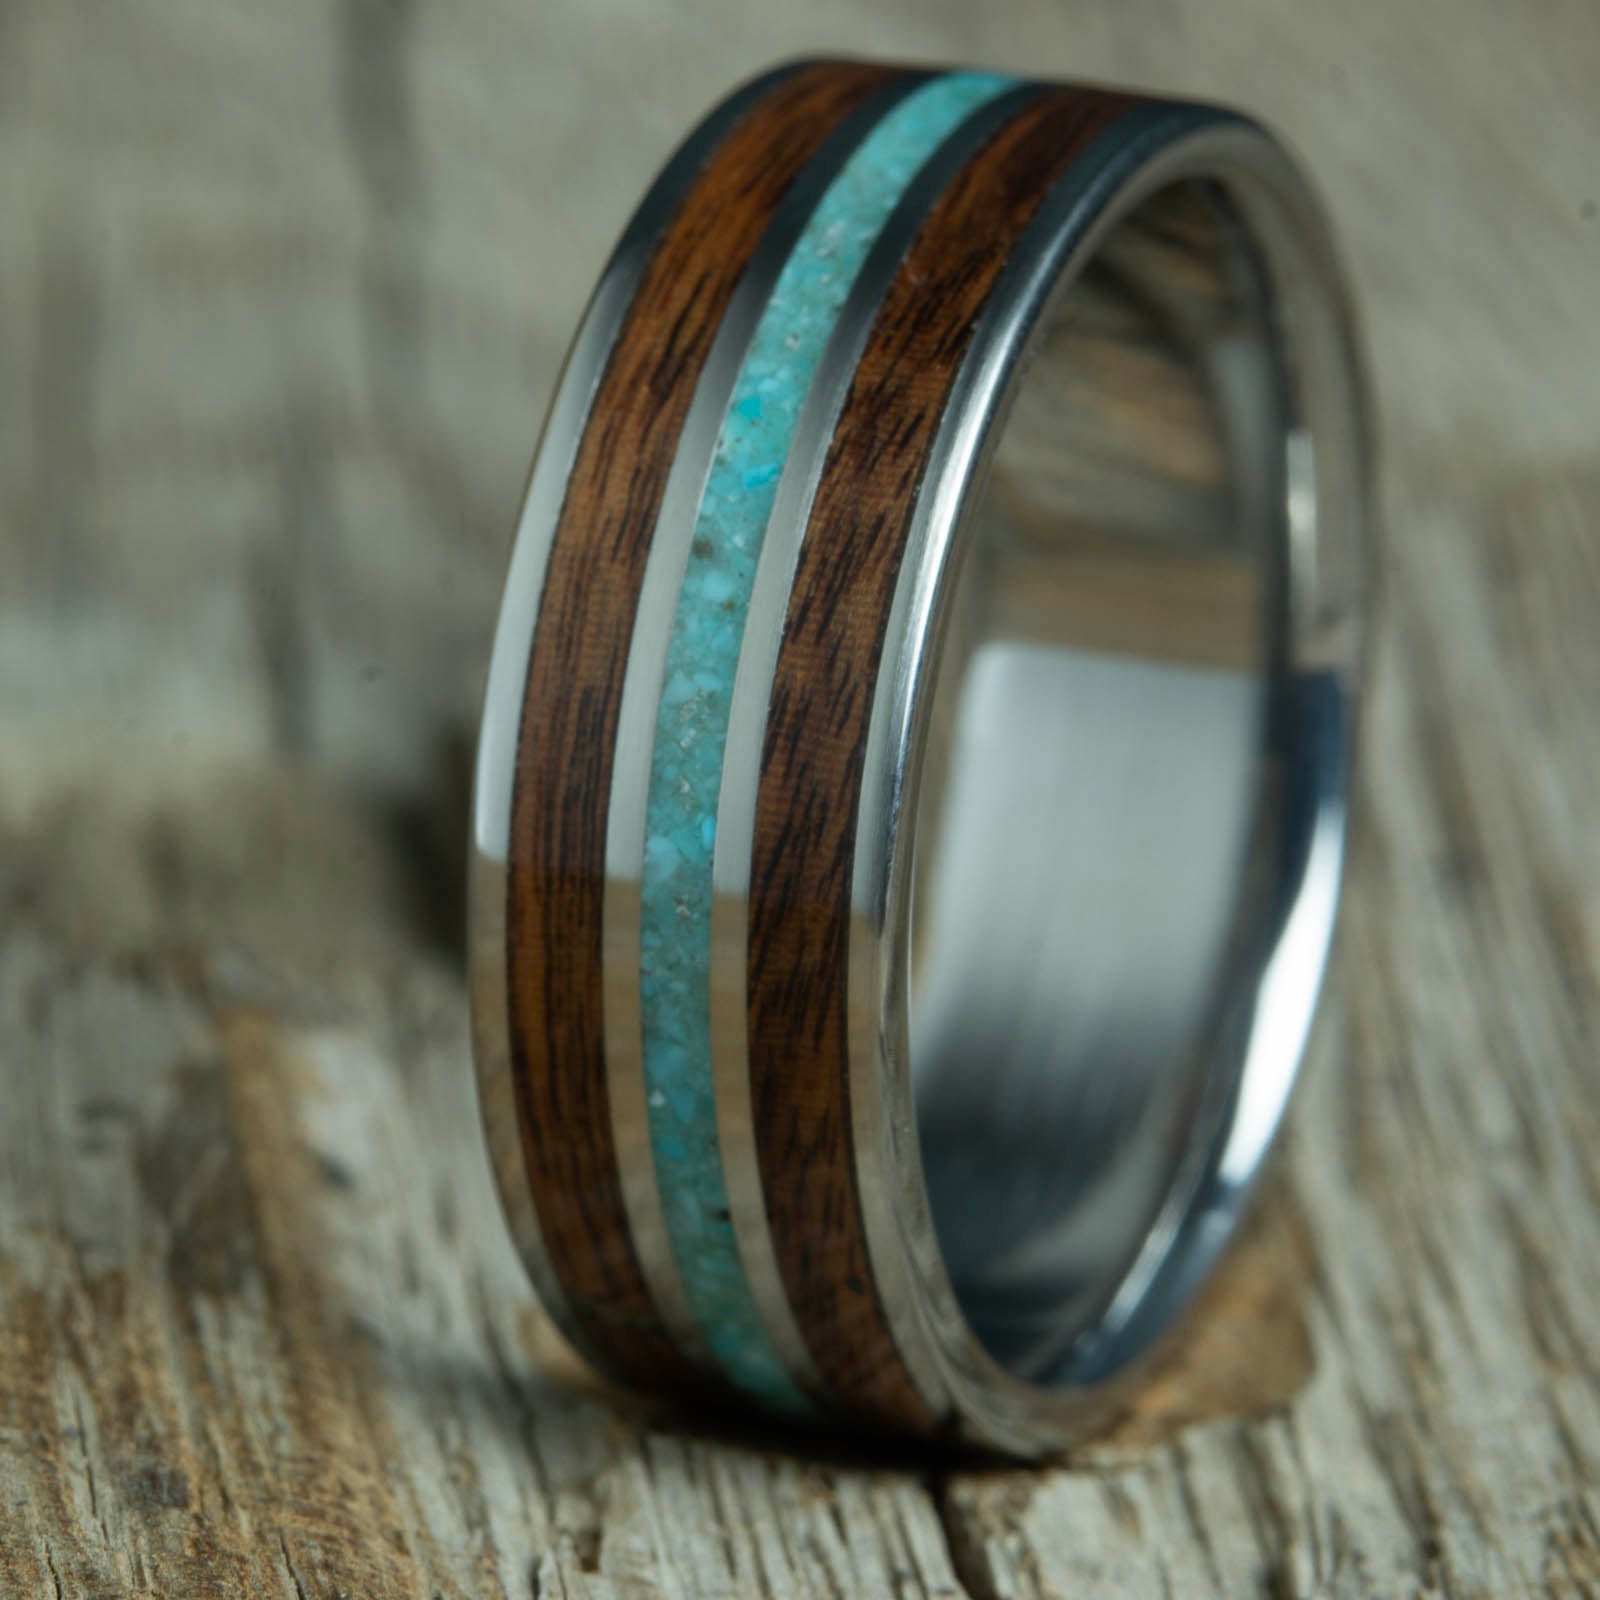 Turquoise and rosewood mens wood wedding bands with polished titanium ring